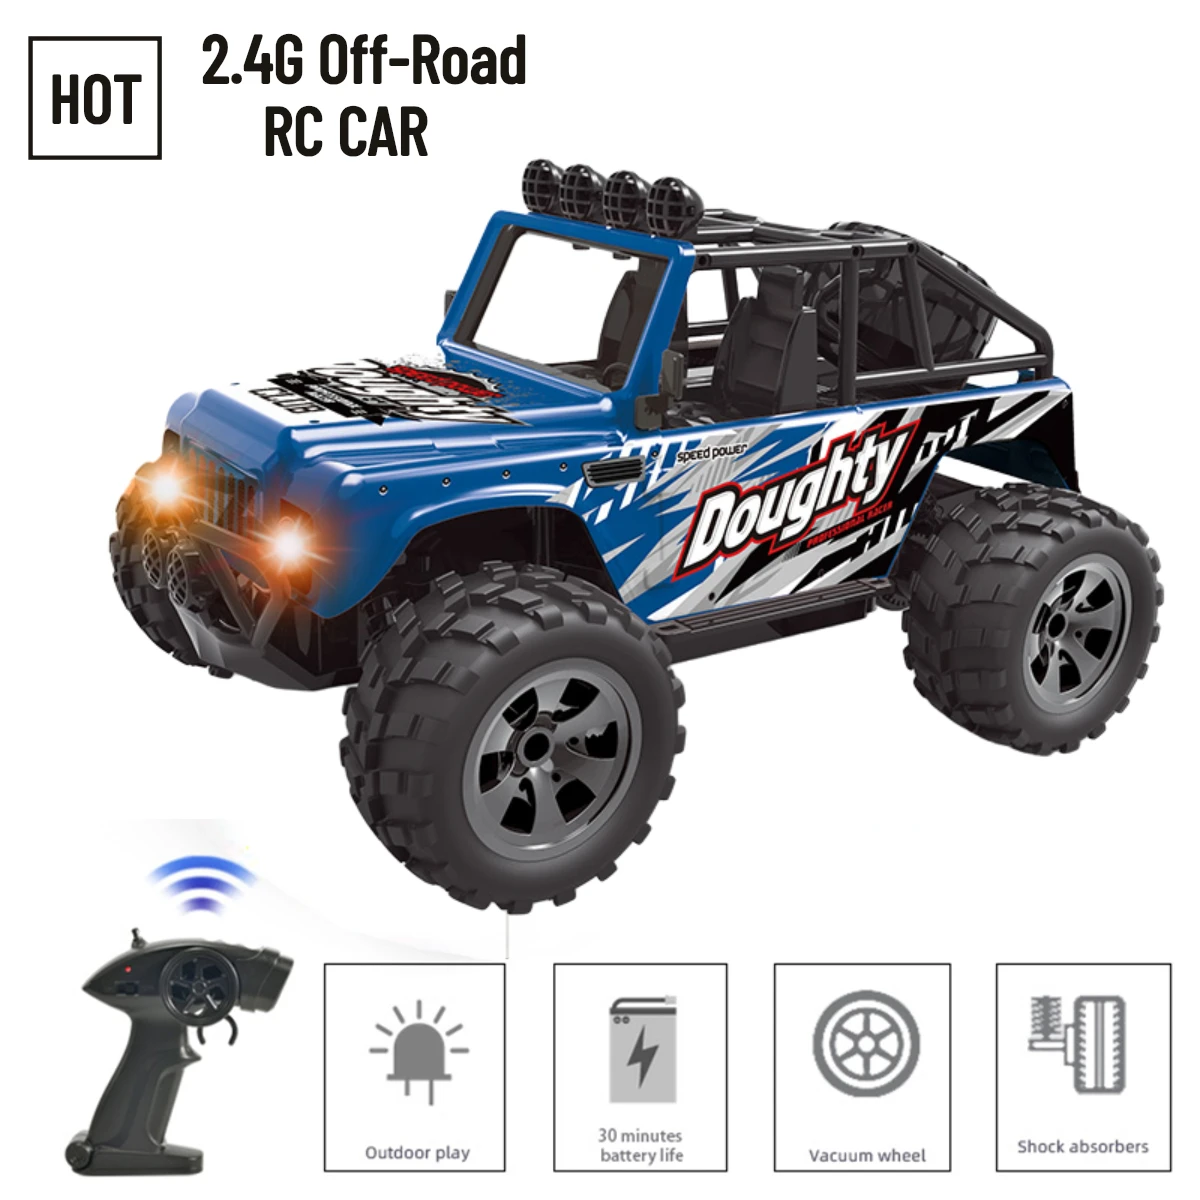 2.4G RC Car With Led Lights High Speed Radio Remote Control Off-Road Buggy Trucks Boys Girls Xmas Gift Toys